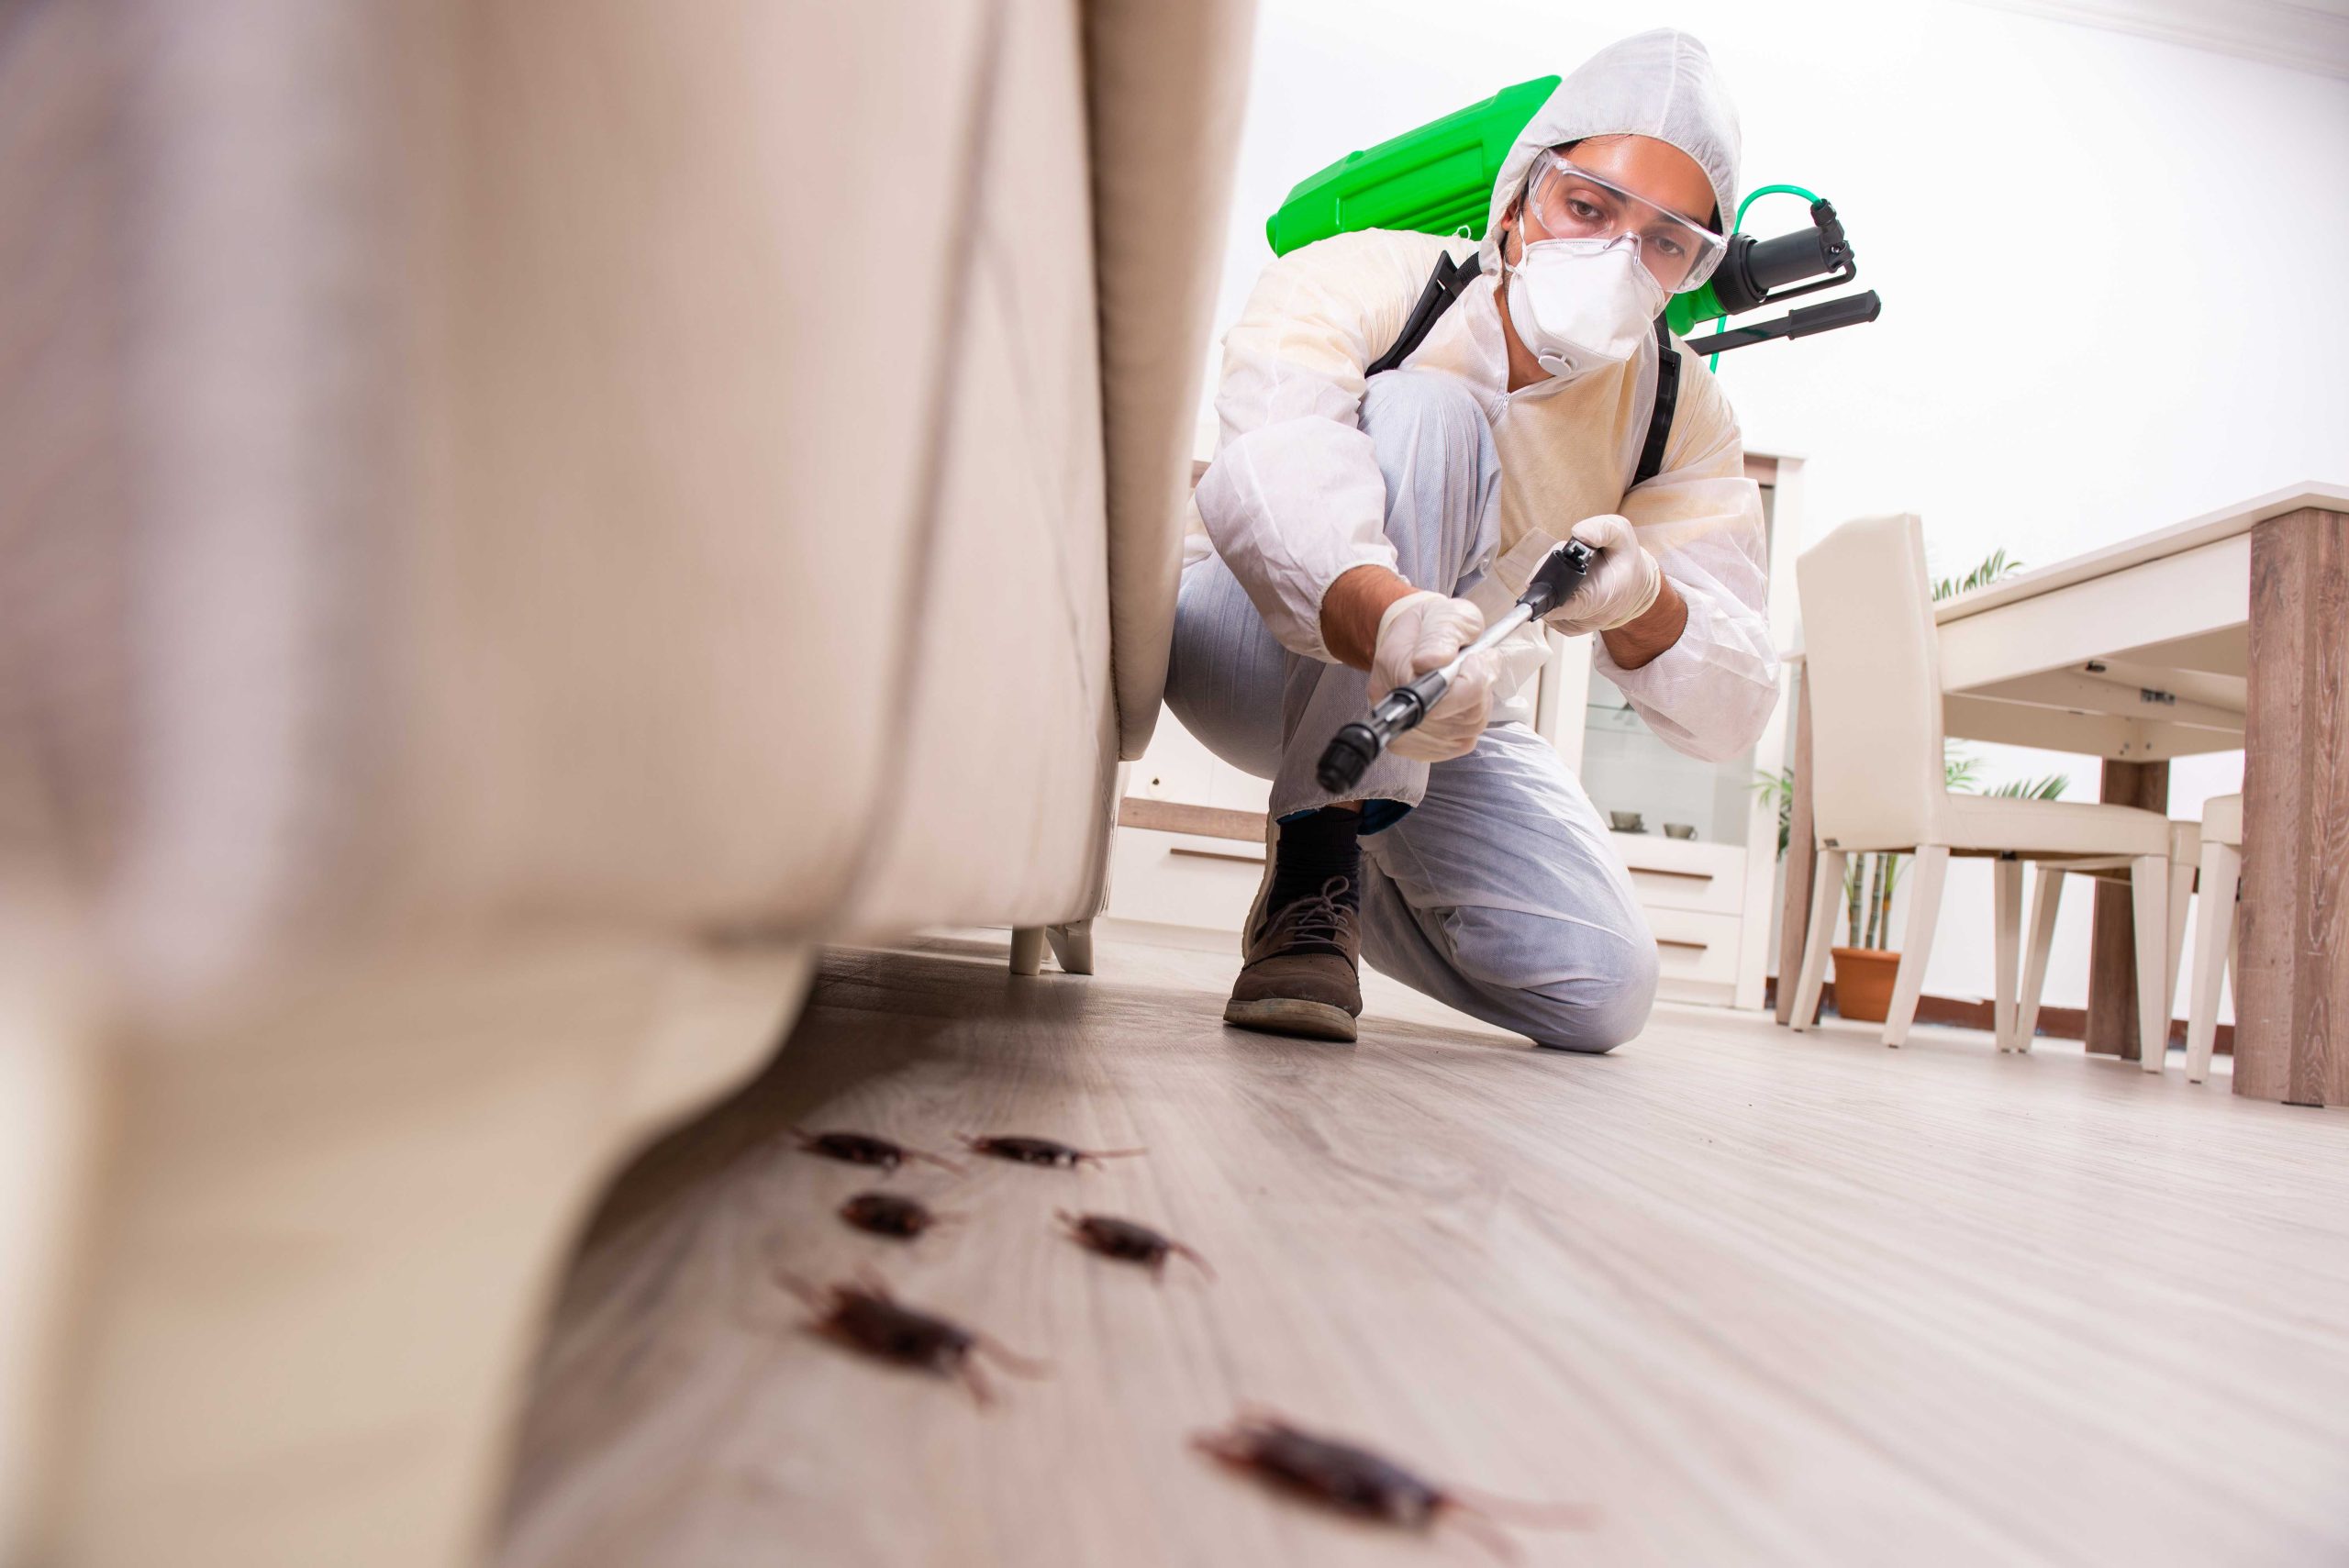 Pest-Control experts in Mesa specializing in prevention and eradication of various pests. Don't let pests damage your property and endanger your health.